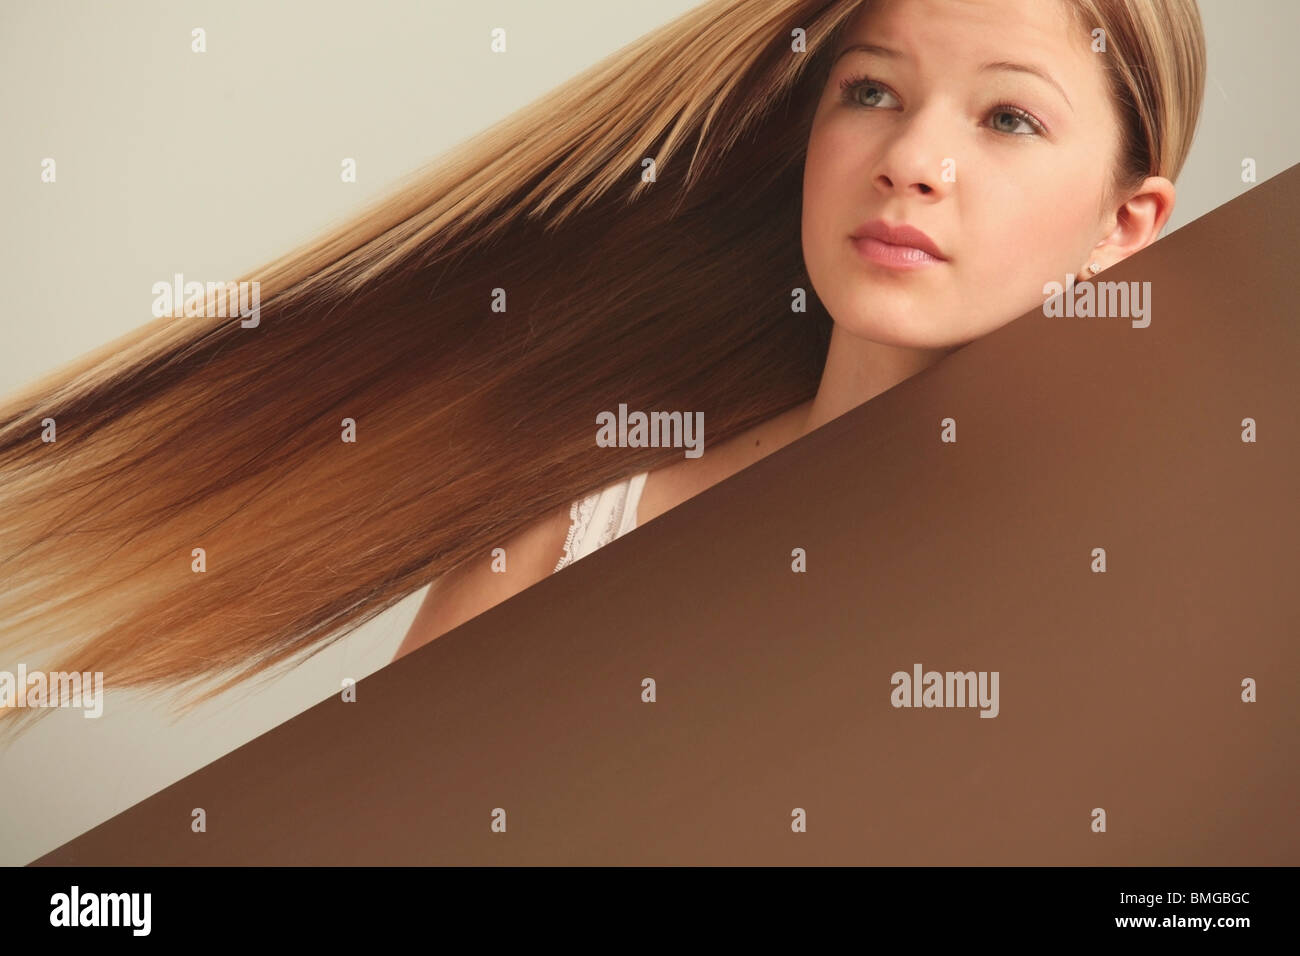 Portrait Of A Girl With Long, Straight Hair Stock Photo